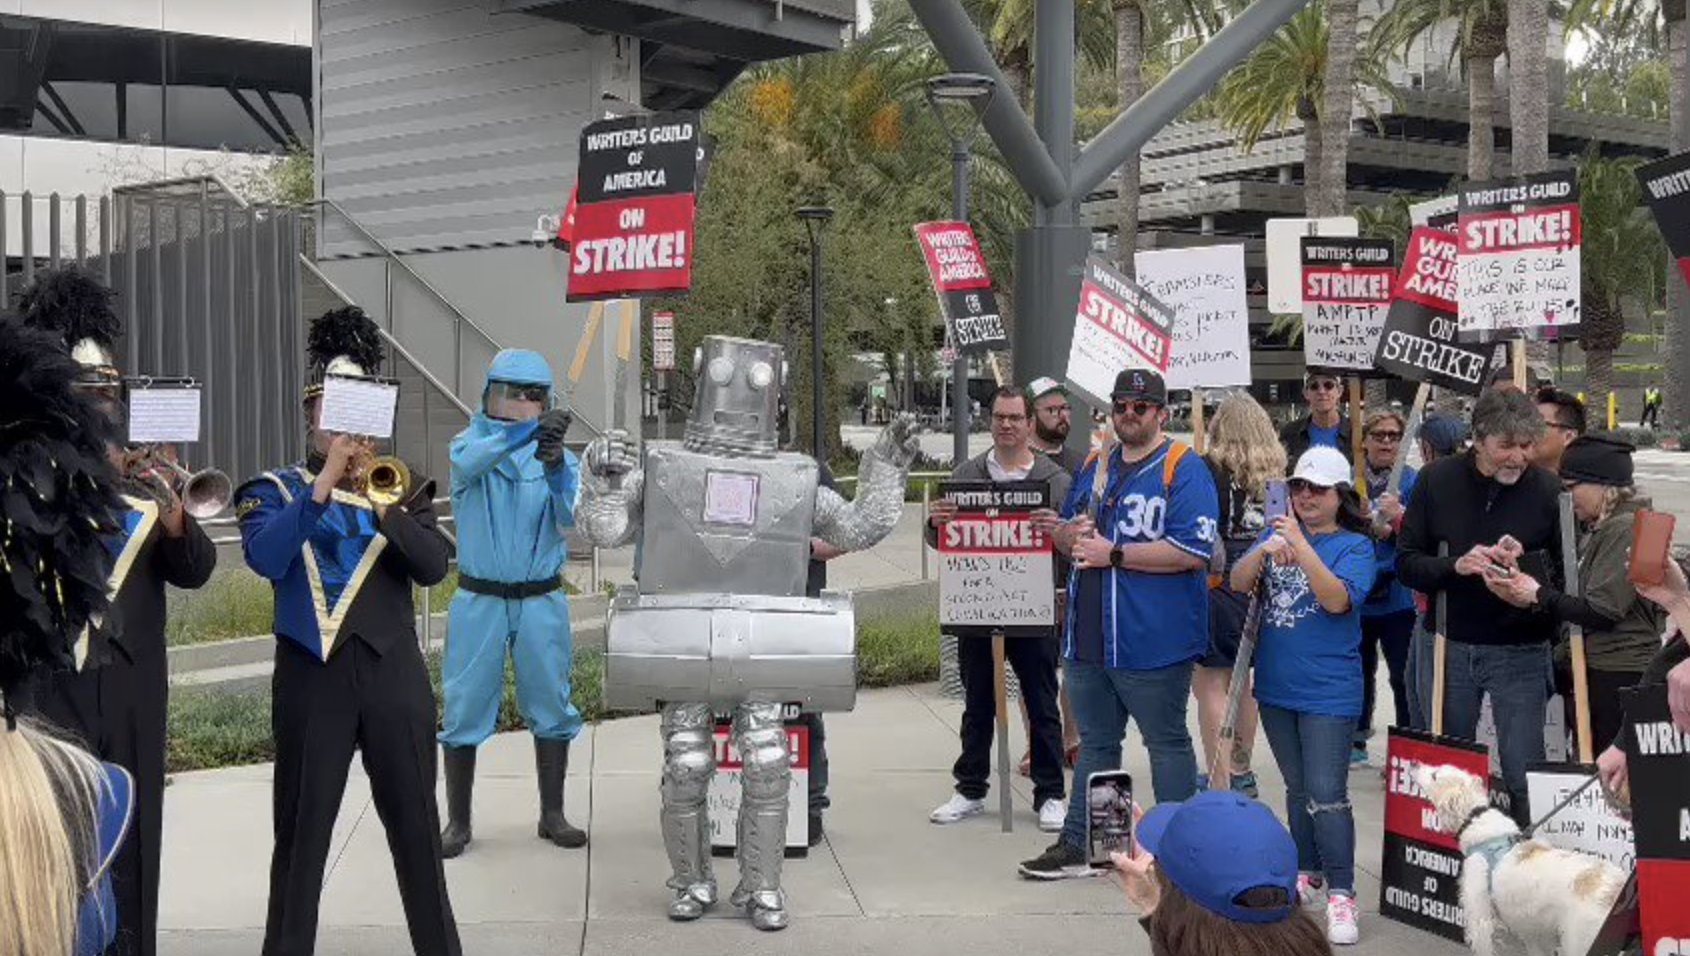 Dispatches From The Picket Lines, Day 24: Sen. Gillibrand & Colin Farrell Speak In NY; Lil Wayne Sends Burgers, A Robot Pickets & A Marching Band Plays In LA